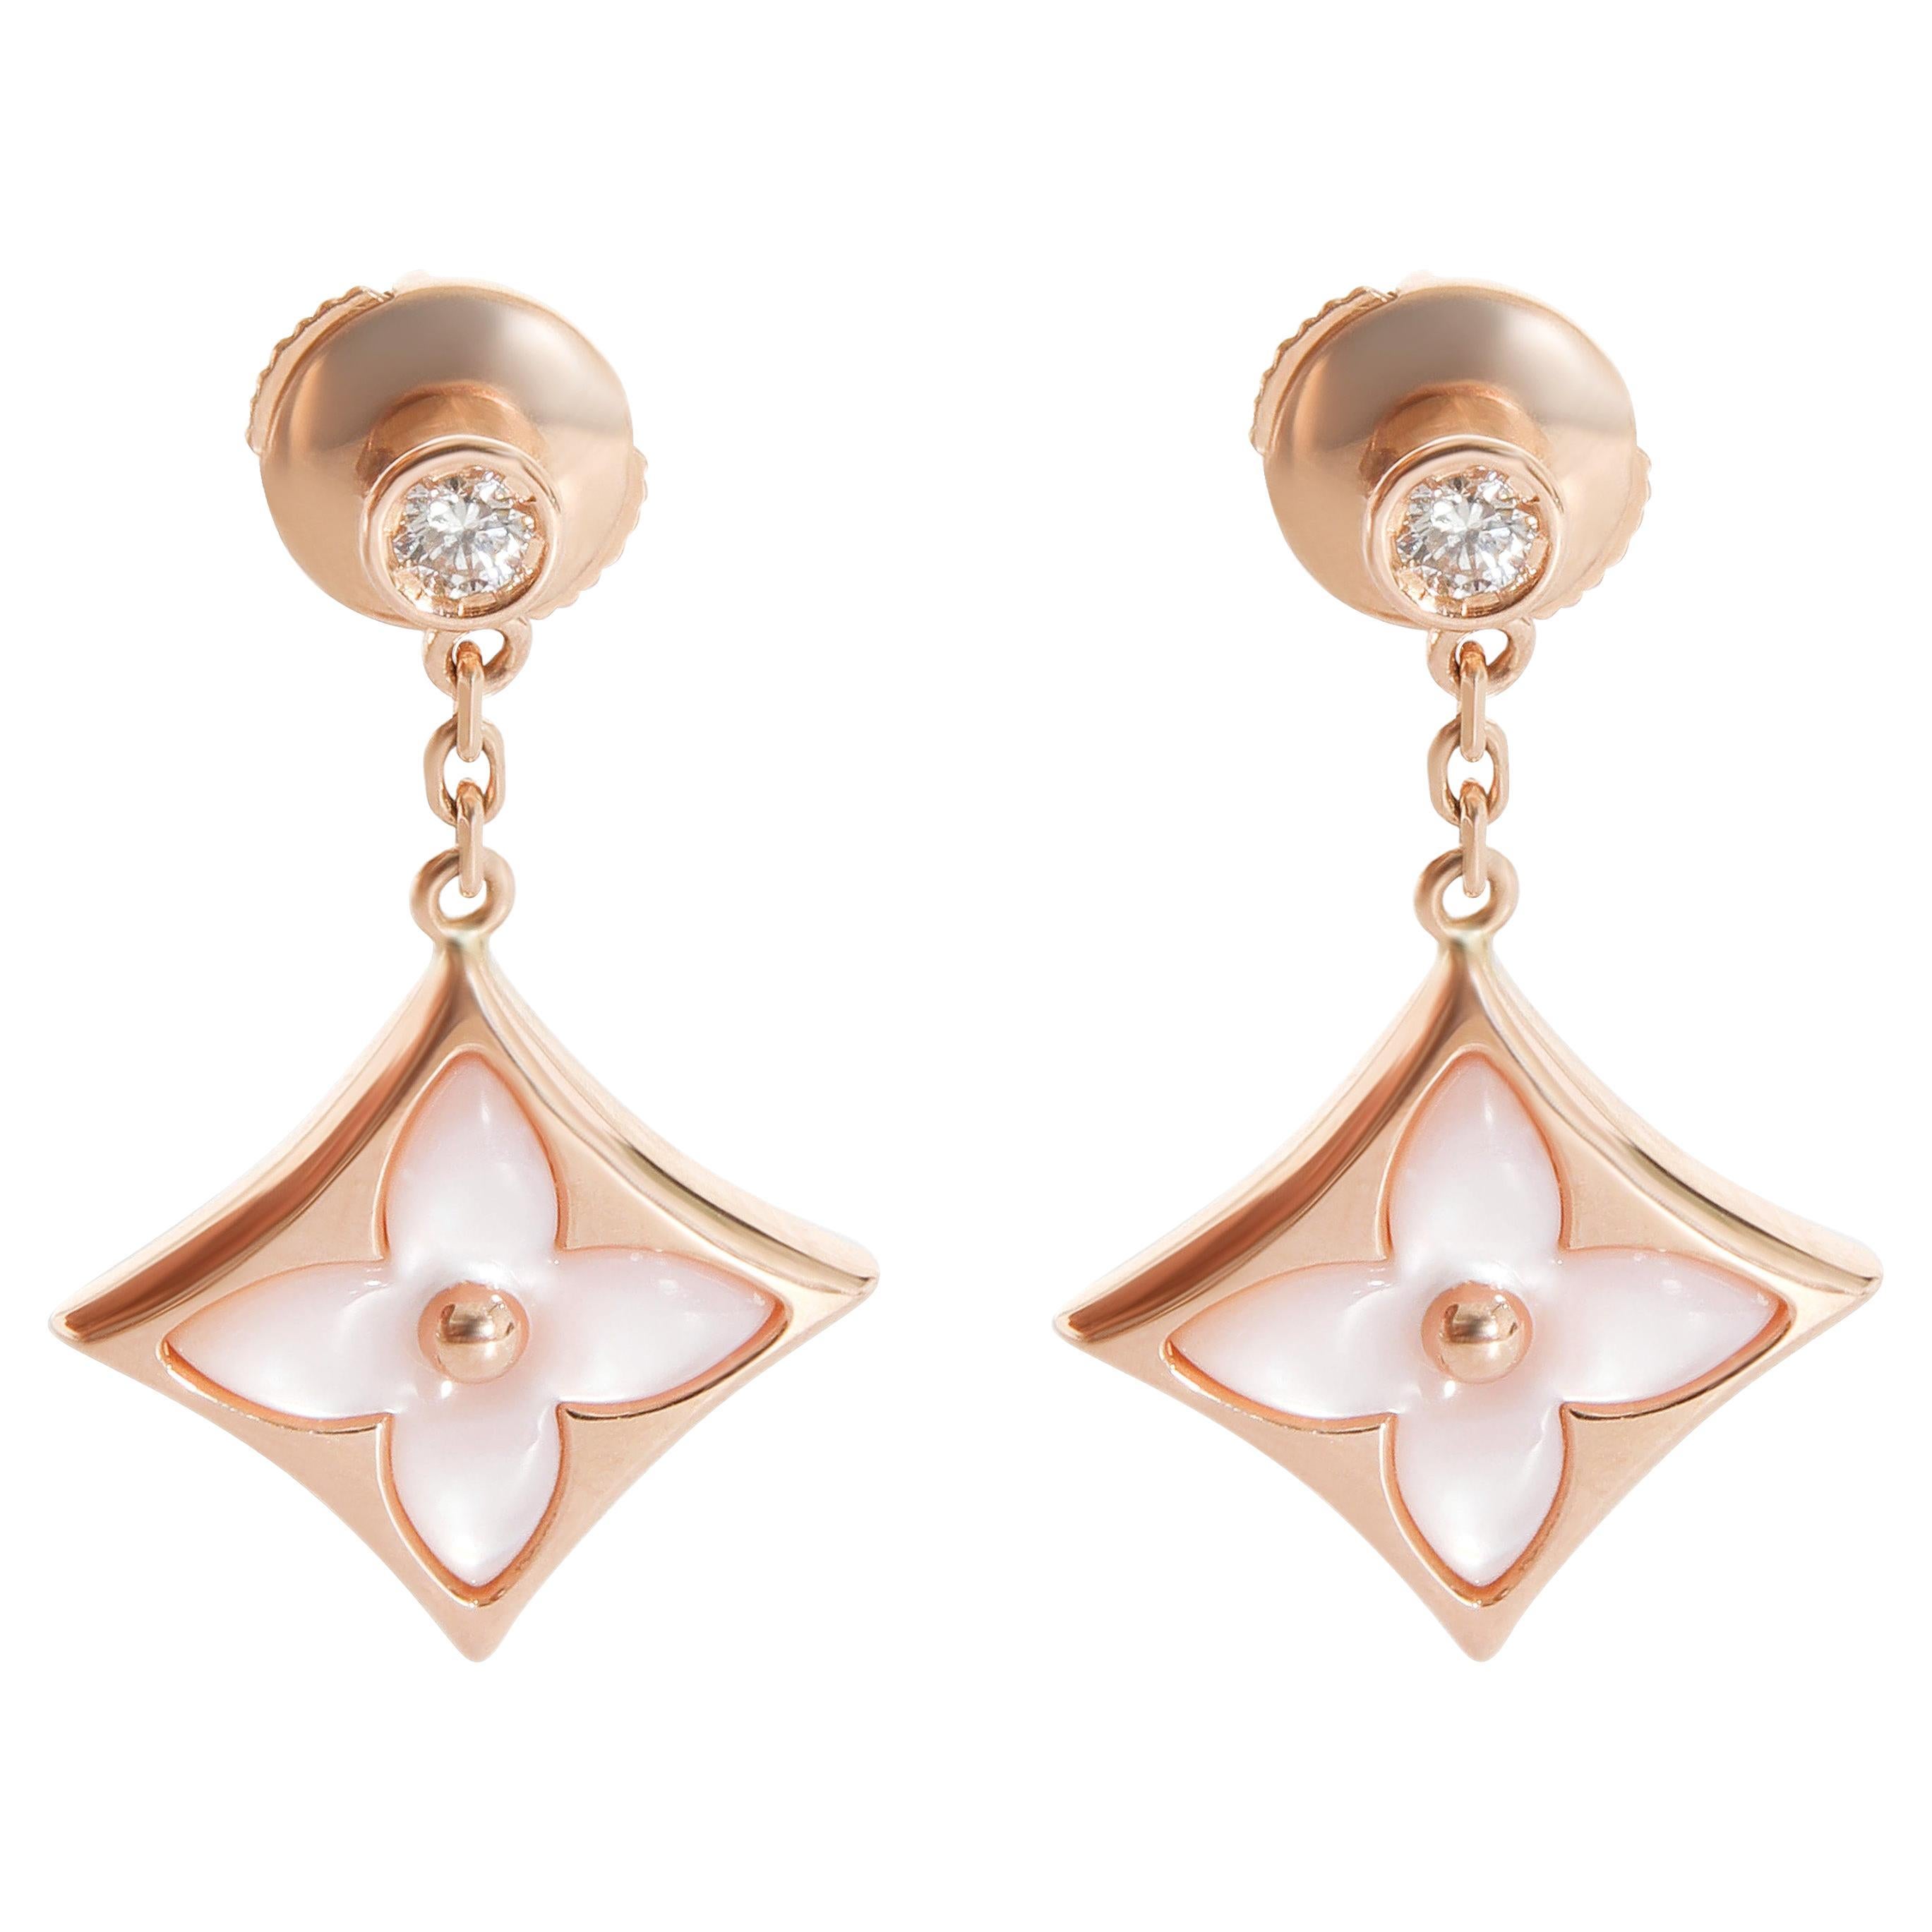 Louisette Stud Earrings with Enamel and Faux Pearls Gold/Silver